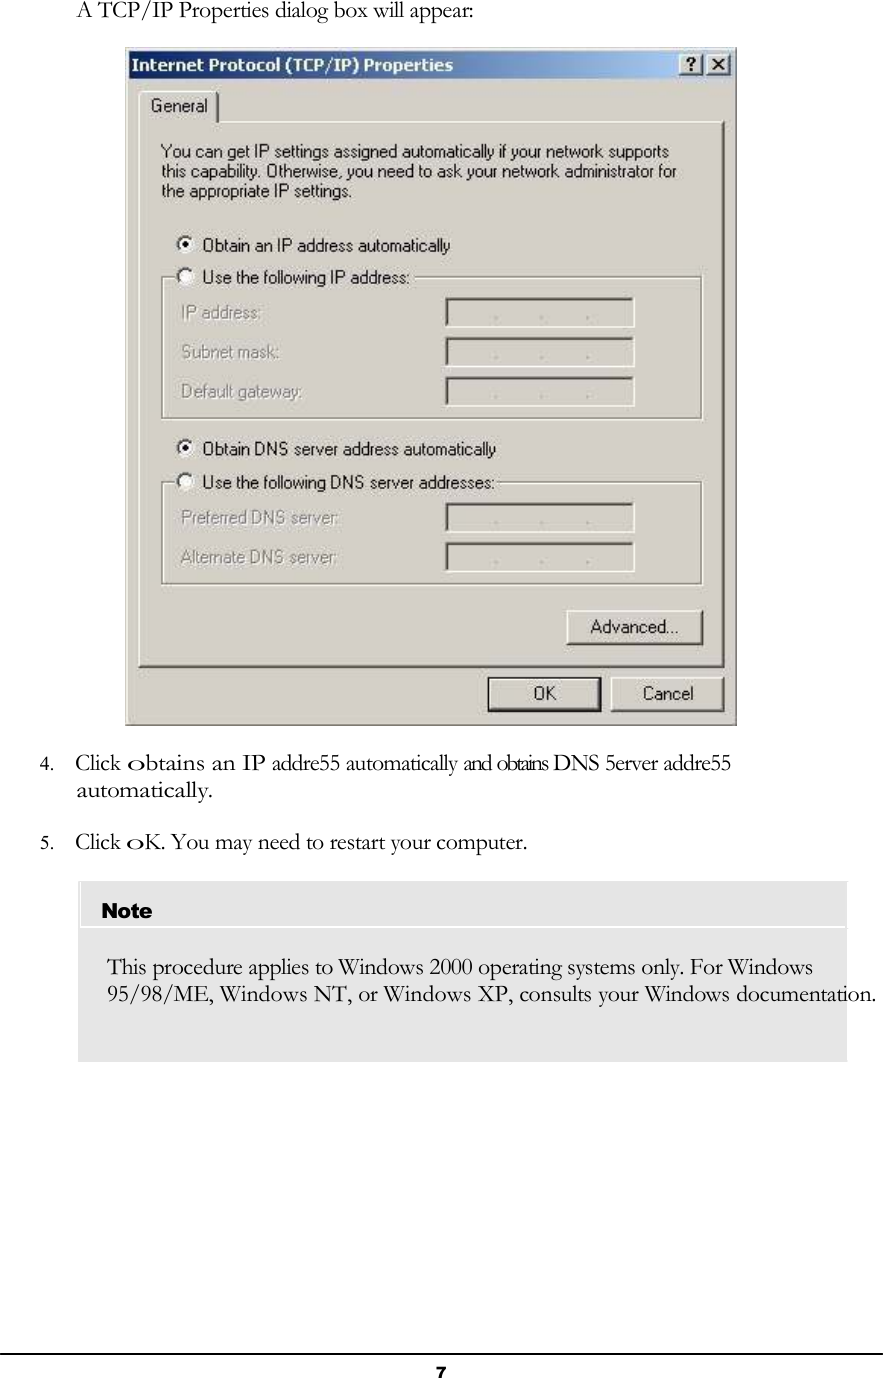 7       A TCP/IP Properties dialog box will appear:    4. Click obtains an IP addre55 automatically and obtains DNS 5erver addre55 automatically.  5. Click oK. You may need to restart your computer.   Note   This procedure applies to Windows 2000 operating systems only. For Windows 95/98/ME, Windows NT, or Windows XP, consults your Windows documentation. 